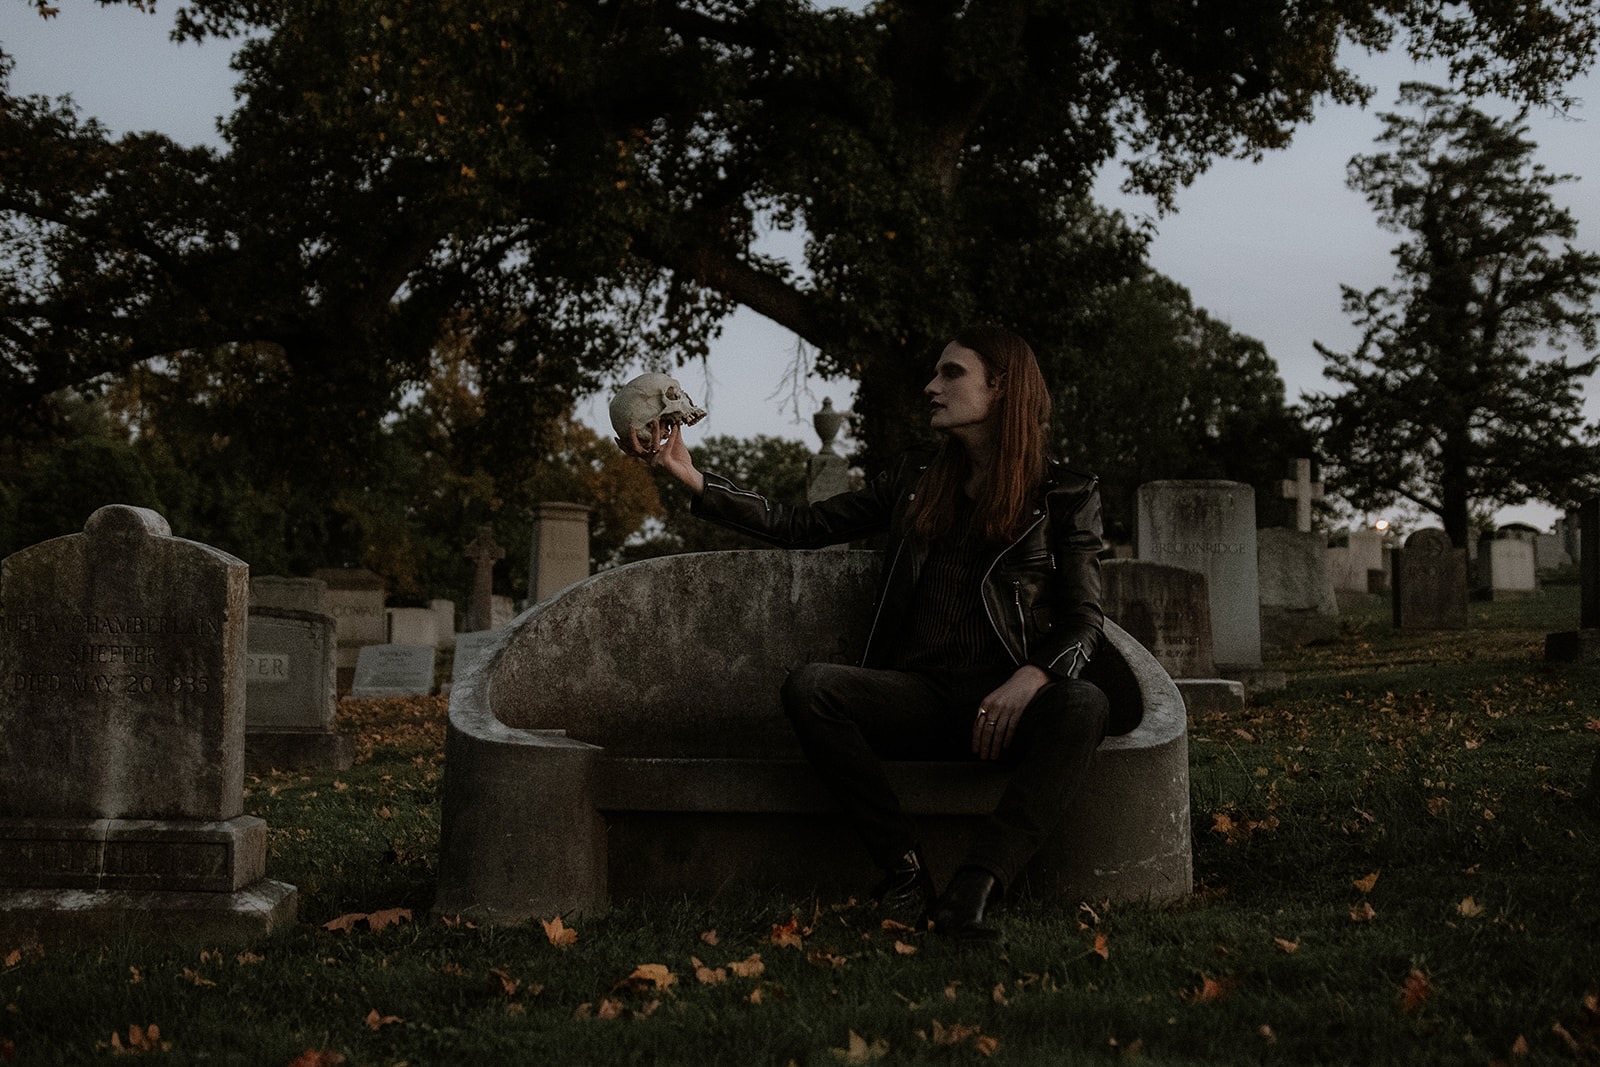 Hunter sits in a graveyard, holding up a fake skull to gaze at. He's wearing a leather jacket and all-black basics. His long brown hair is down.